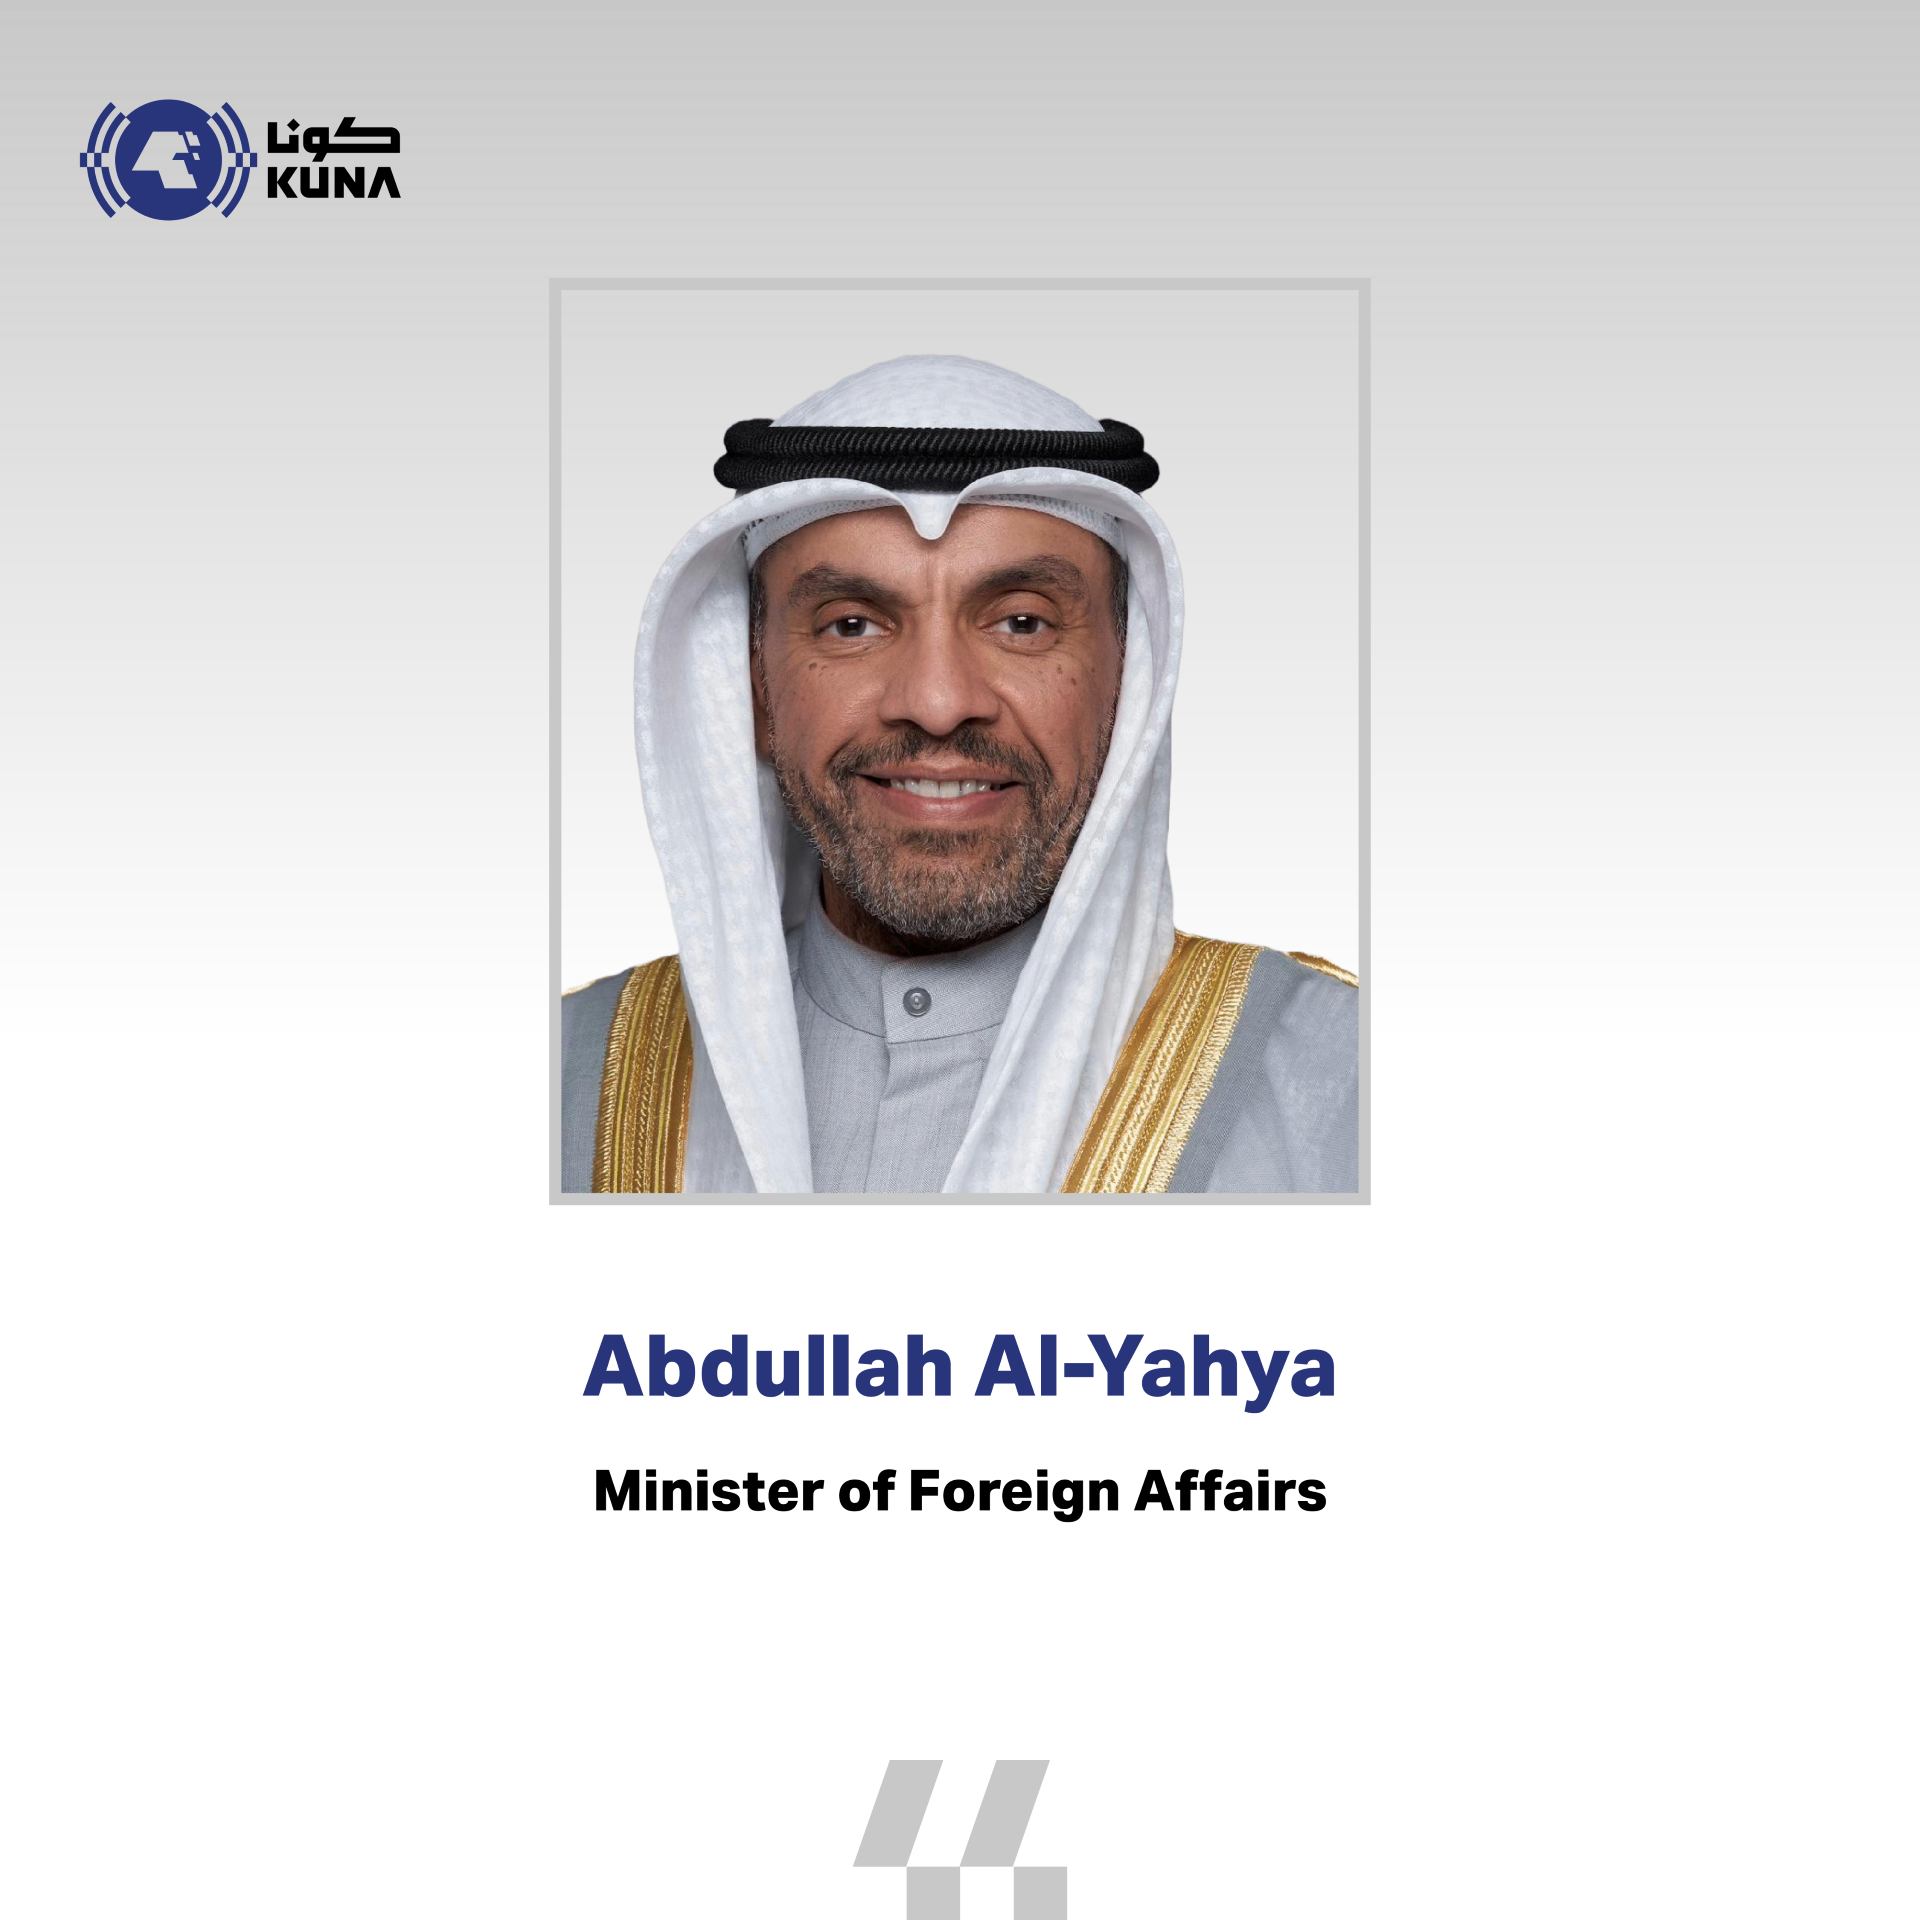 Minister of Foreign Affairs Abdullah Al-Yahya